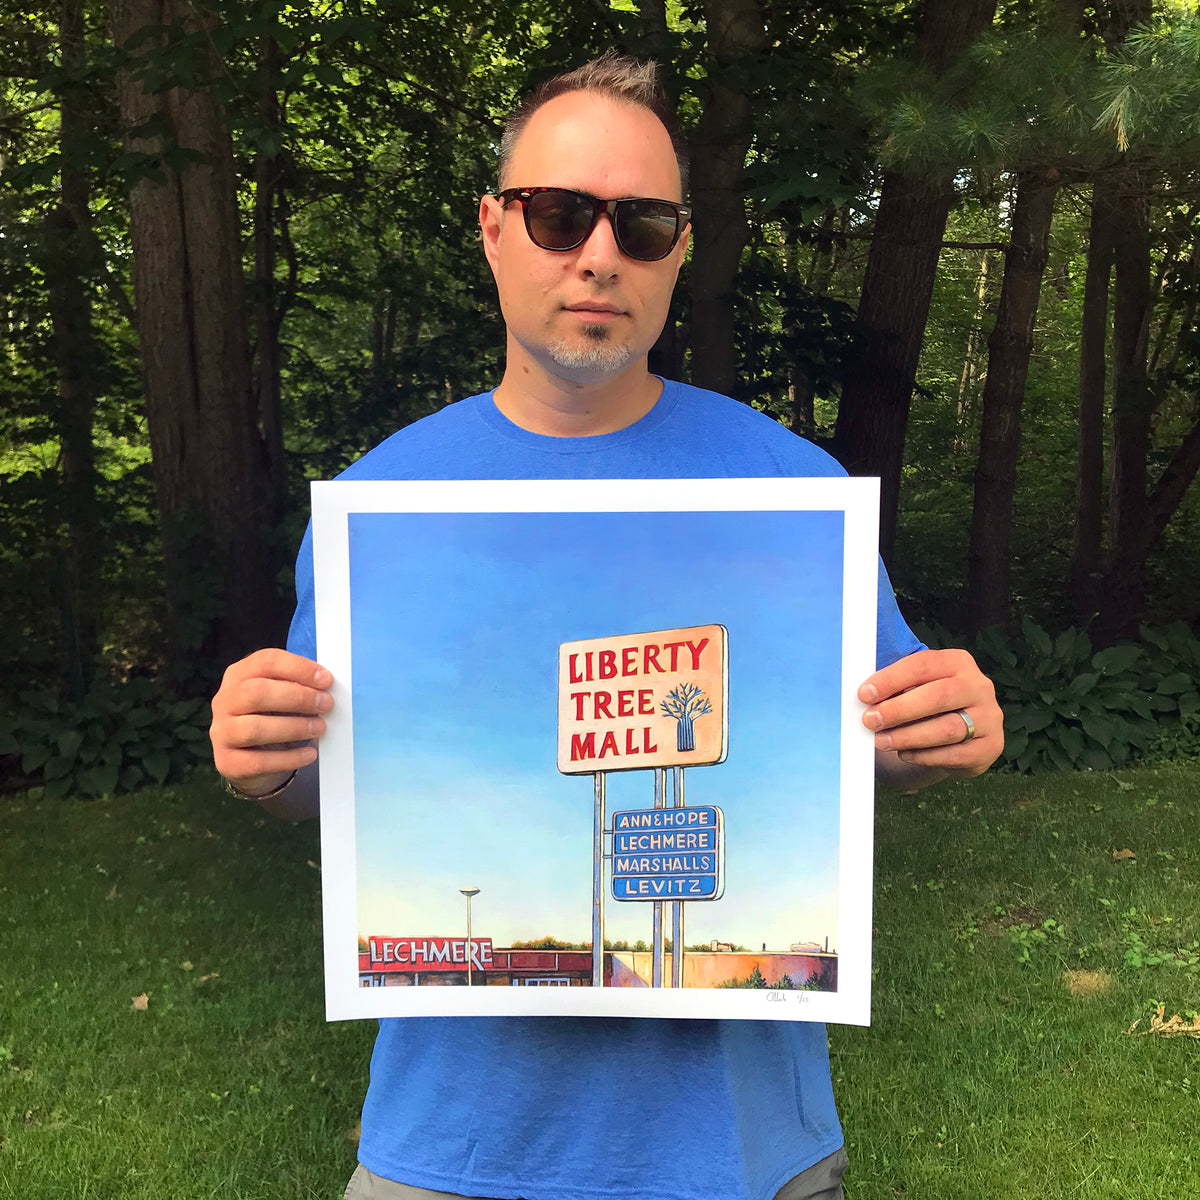 Andrew Houle &quot;Liberty Tree Mall&quot; - Archival Print, Limited Edition of 25 - 17 x 17&quot;